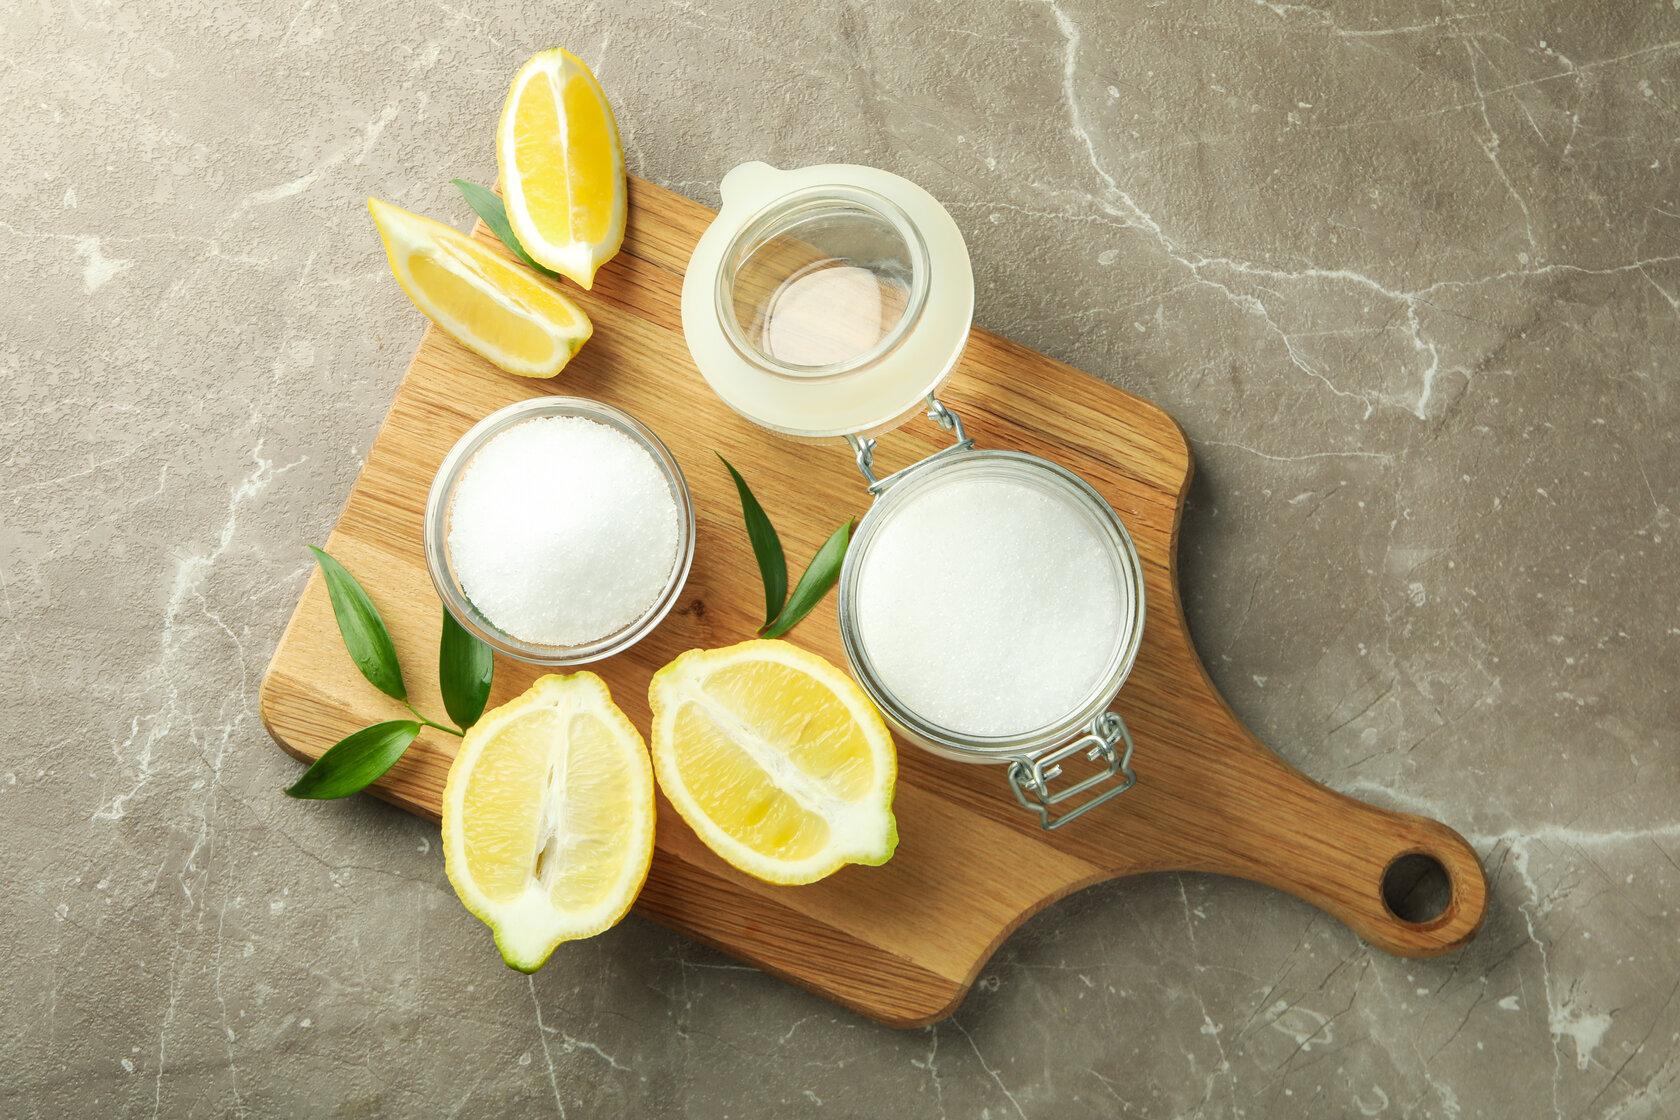 5 Homemade Eco-Friendly Cleaning Recipes From Citrus Fruit